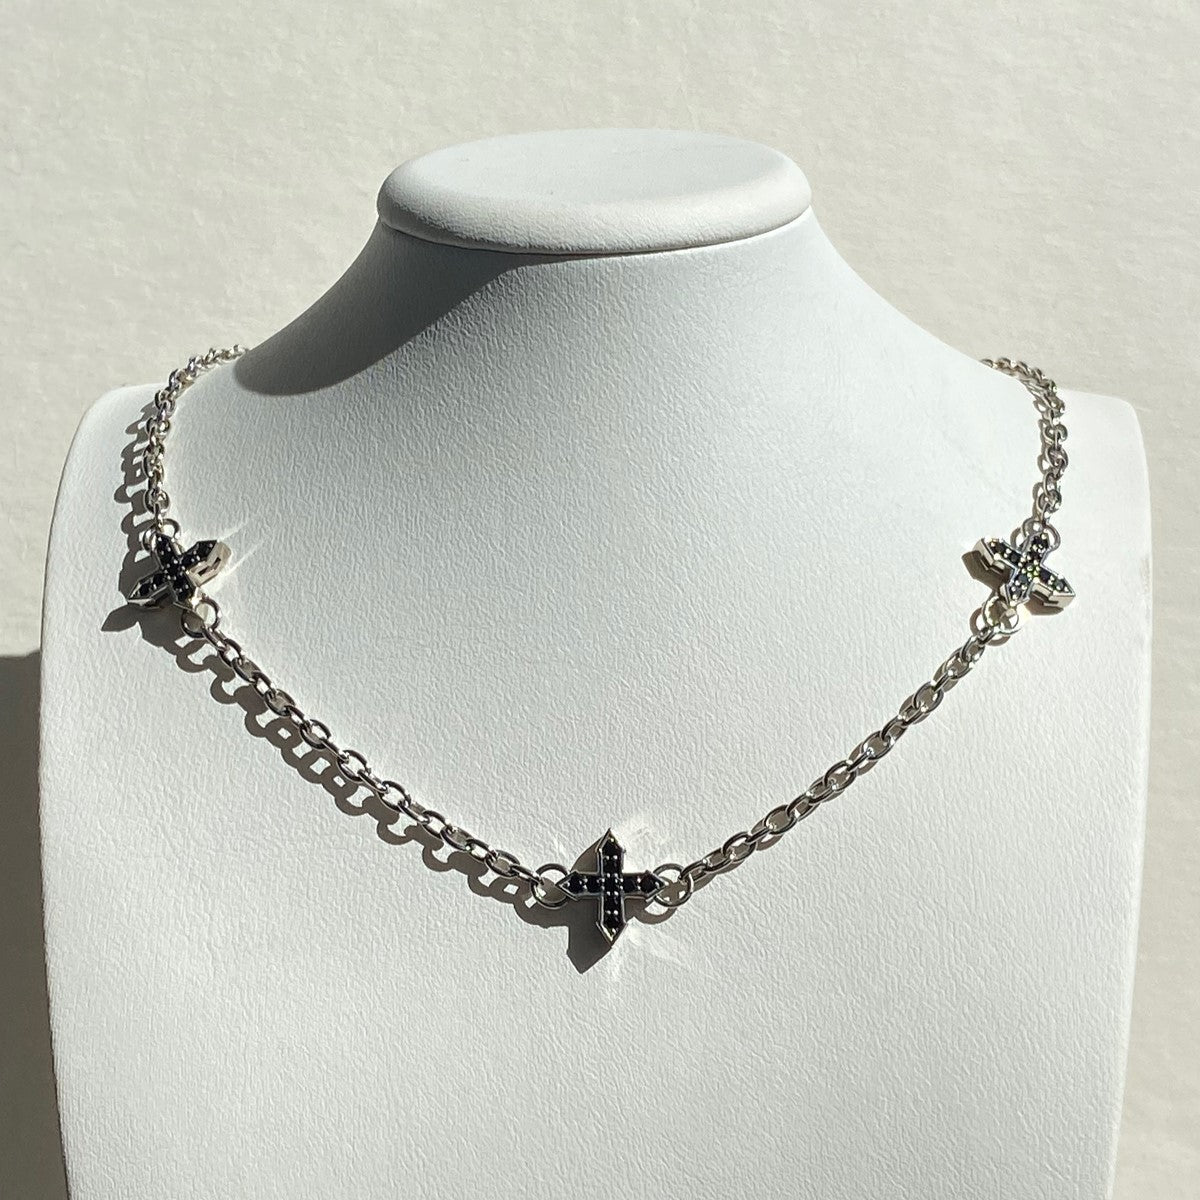 NECKLACE "THREE STARS "GLOW" WITH BLACK SPINEL / SILVER